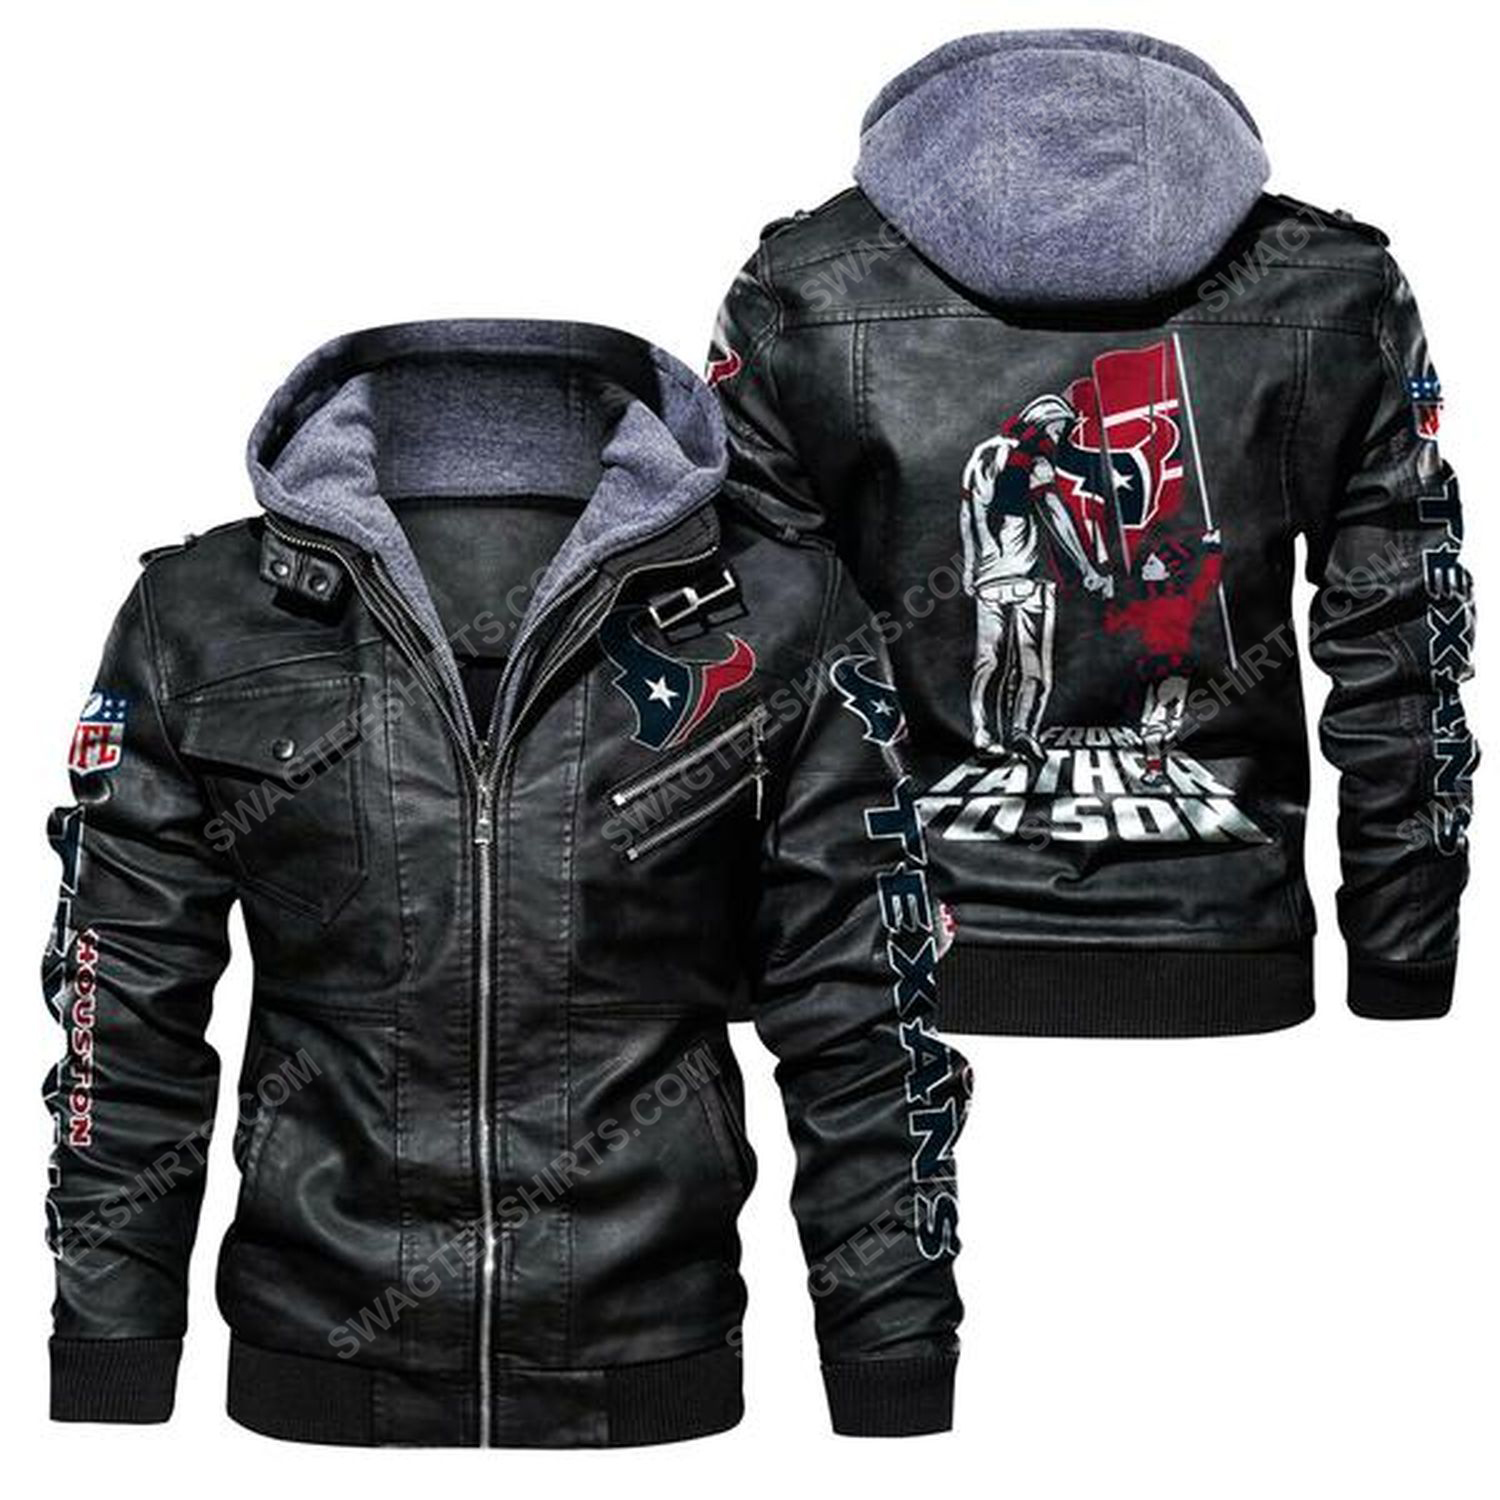 National football league houston texans from father to son leather jacket - black